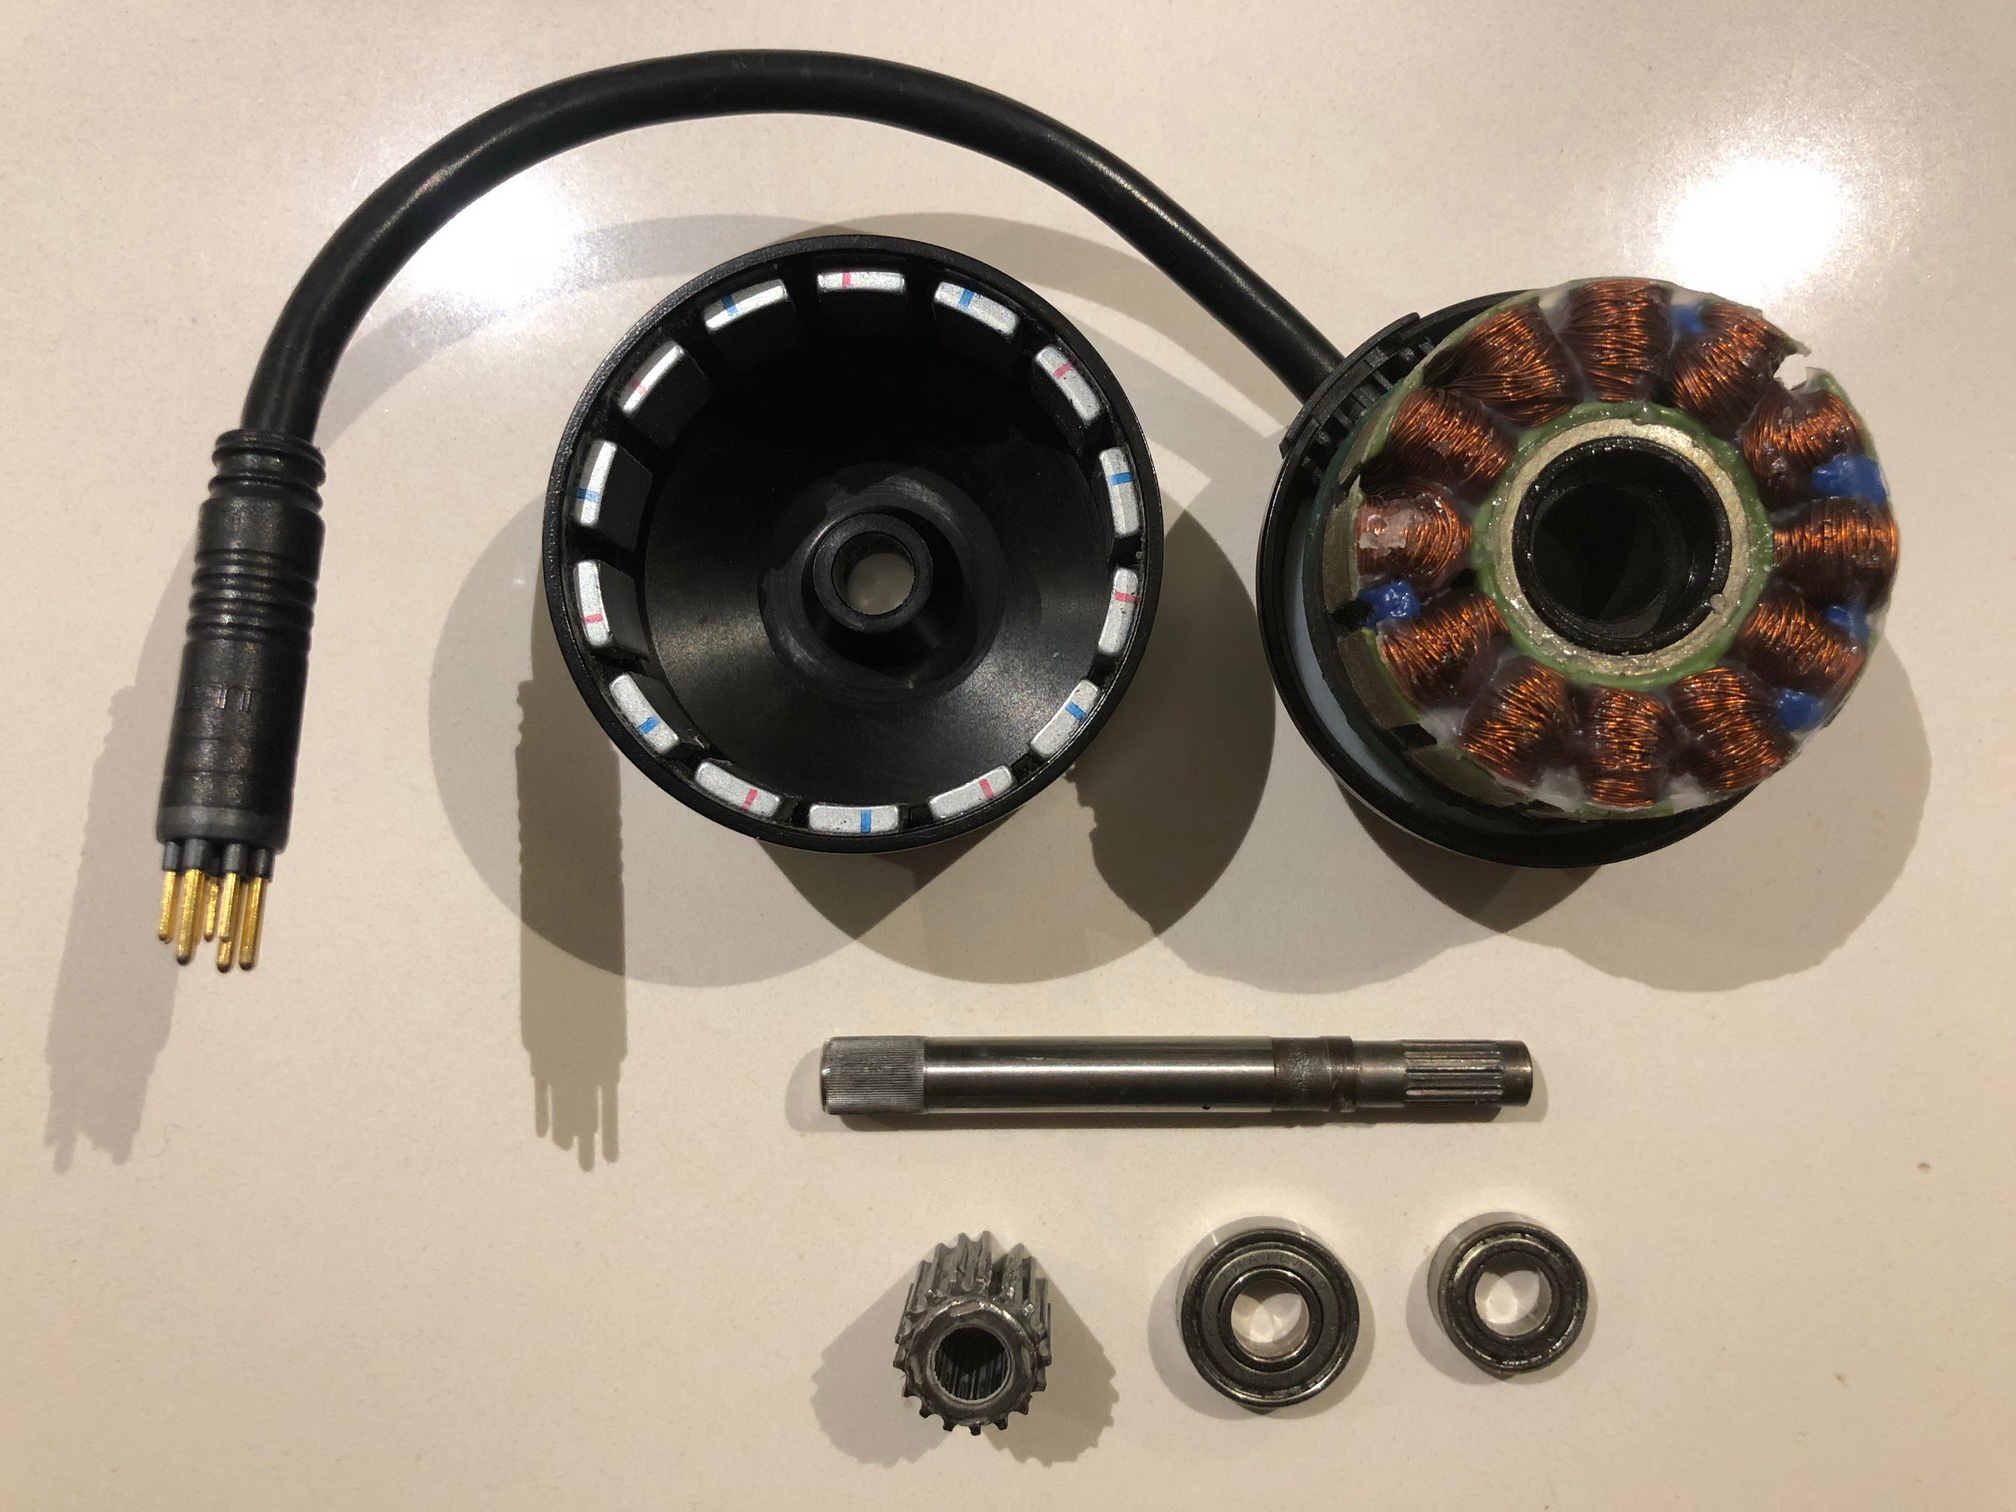 Unassembled Boosted Stealth motor showing inner components